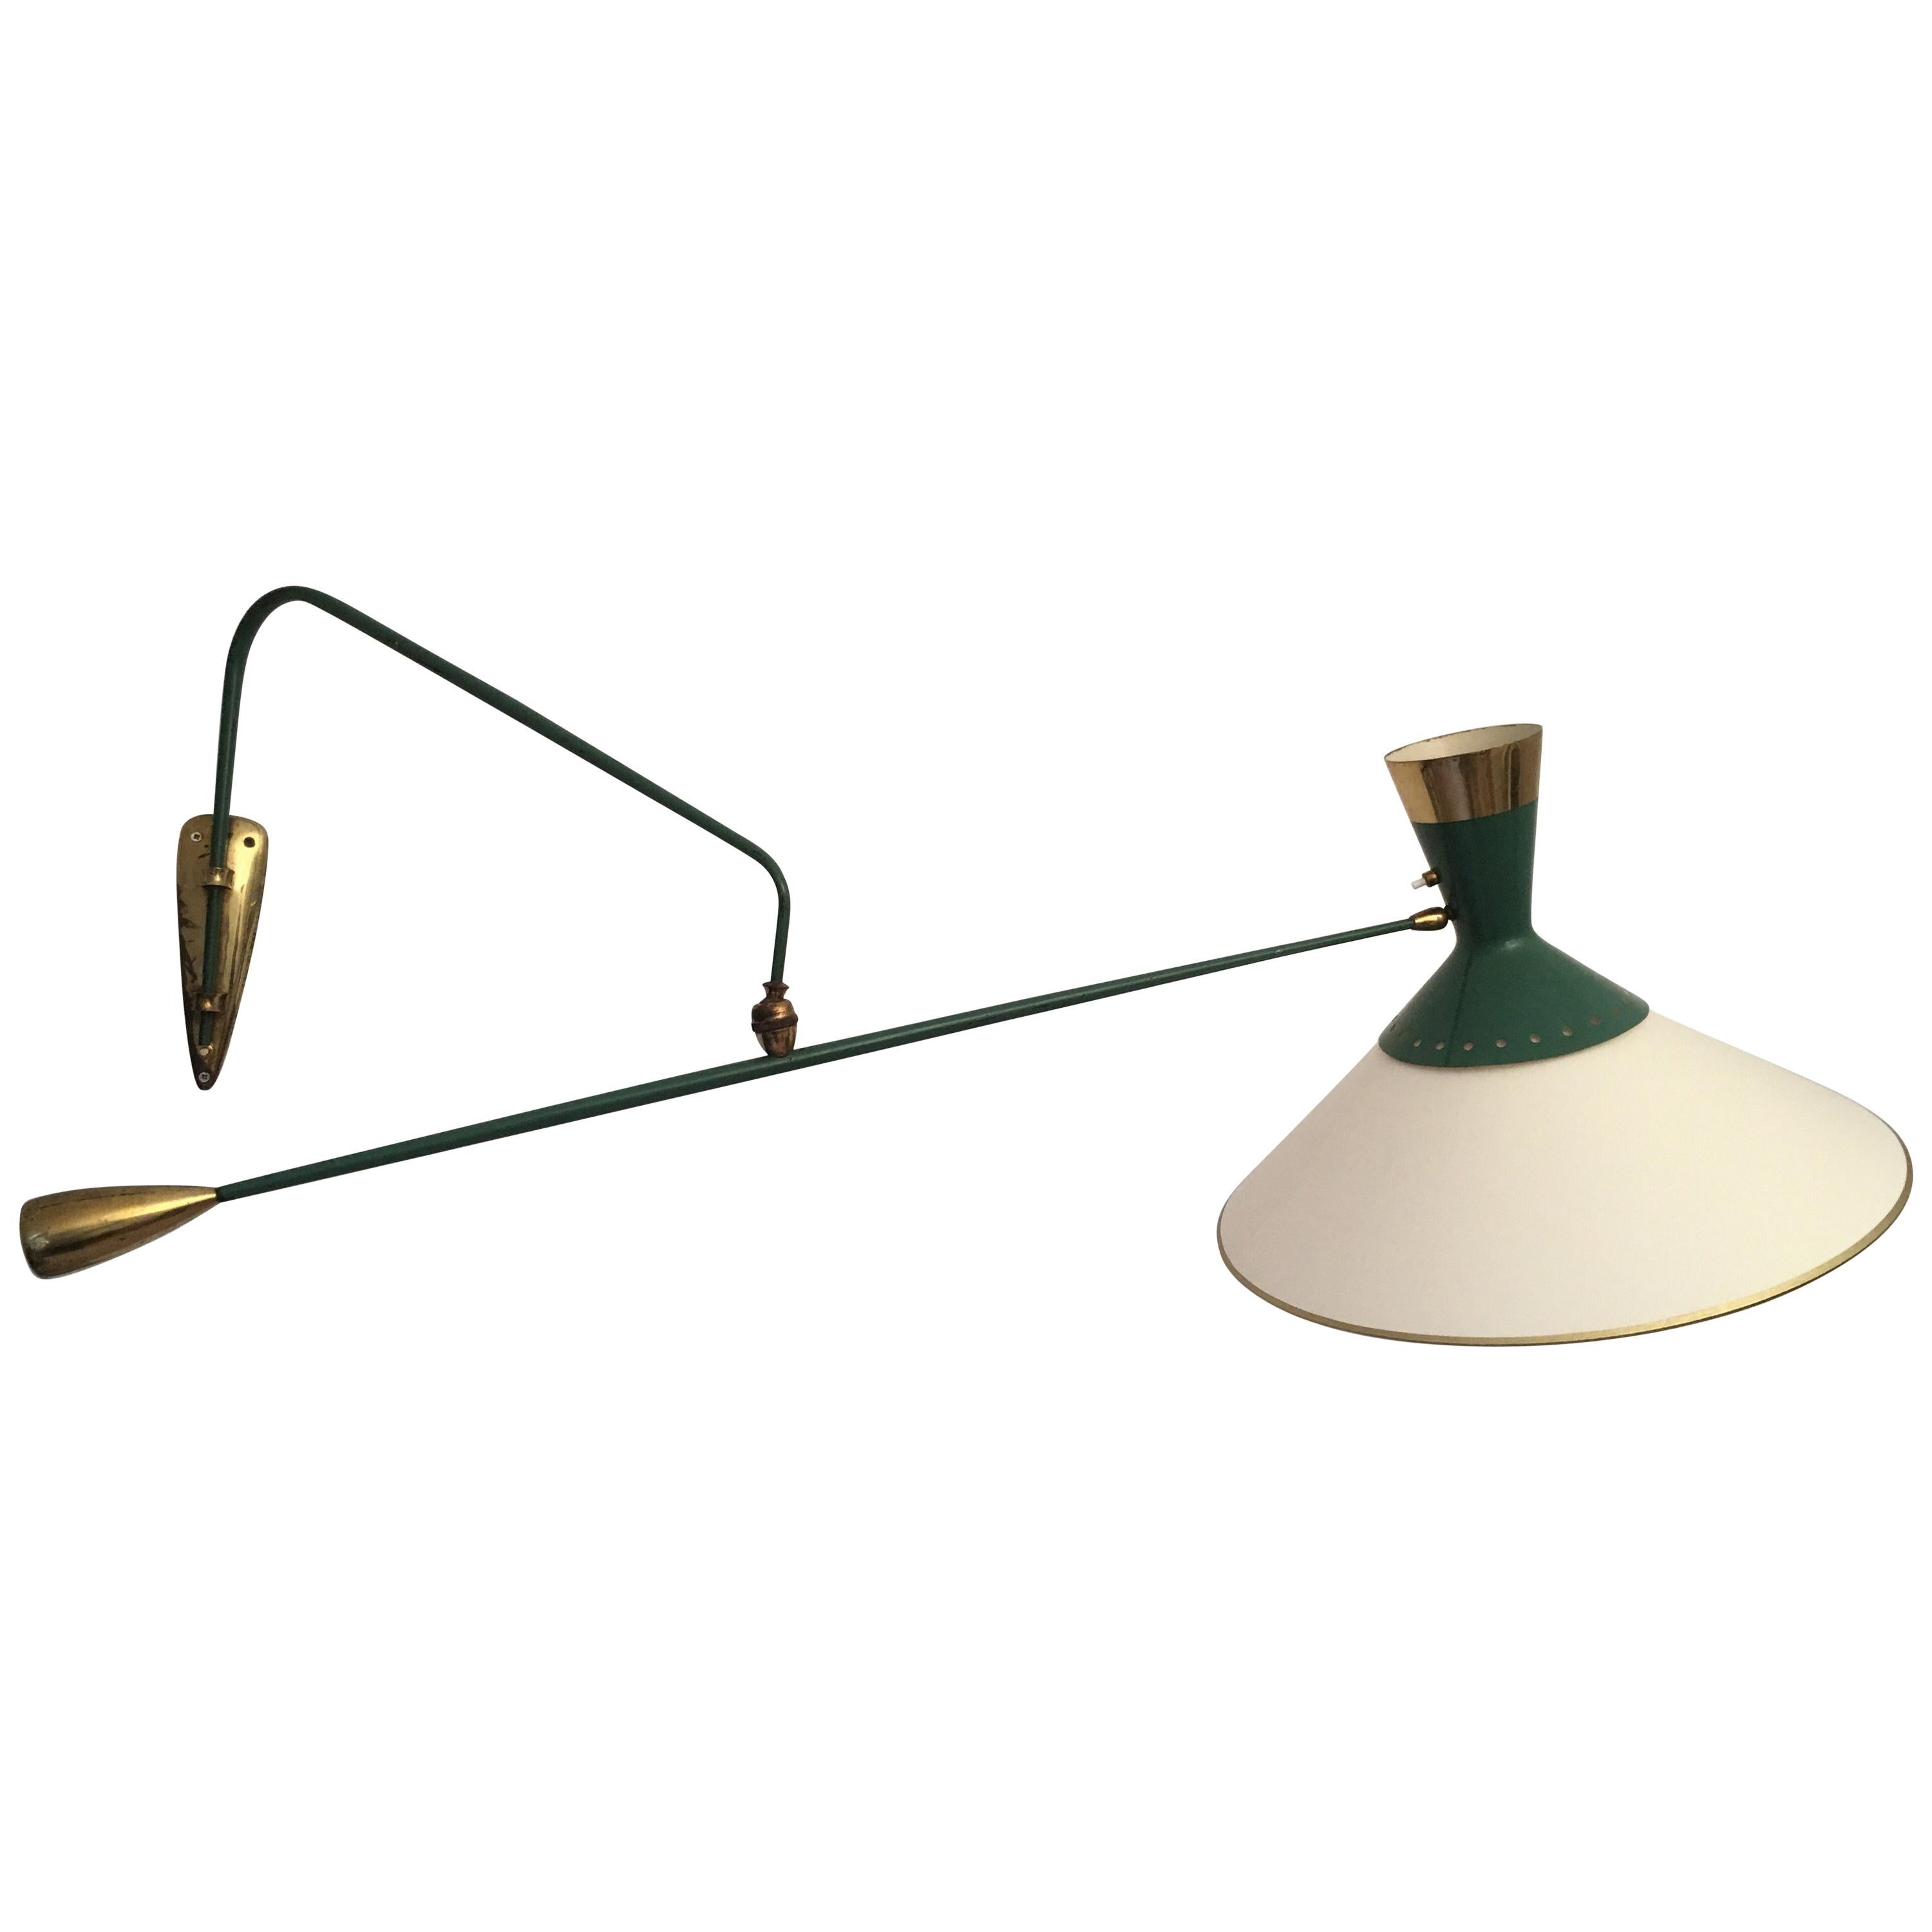 Arlus Green and Gilt Counter Balance Swing Arm Wall Lamp, French 1950s For Sale